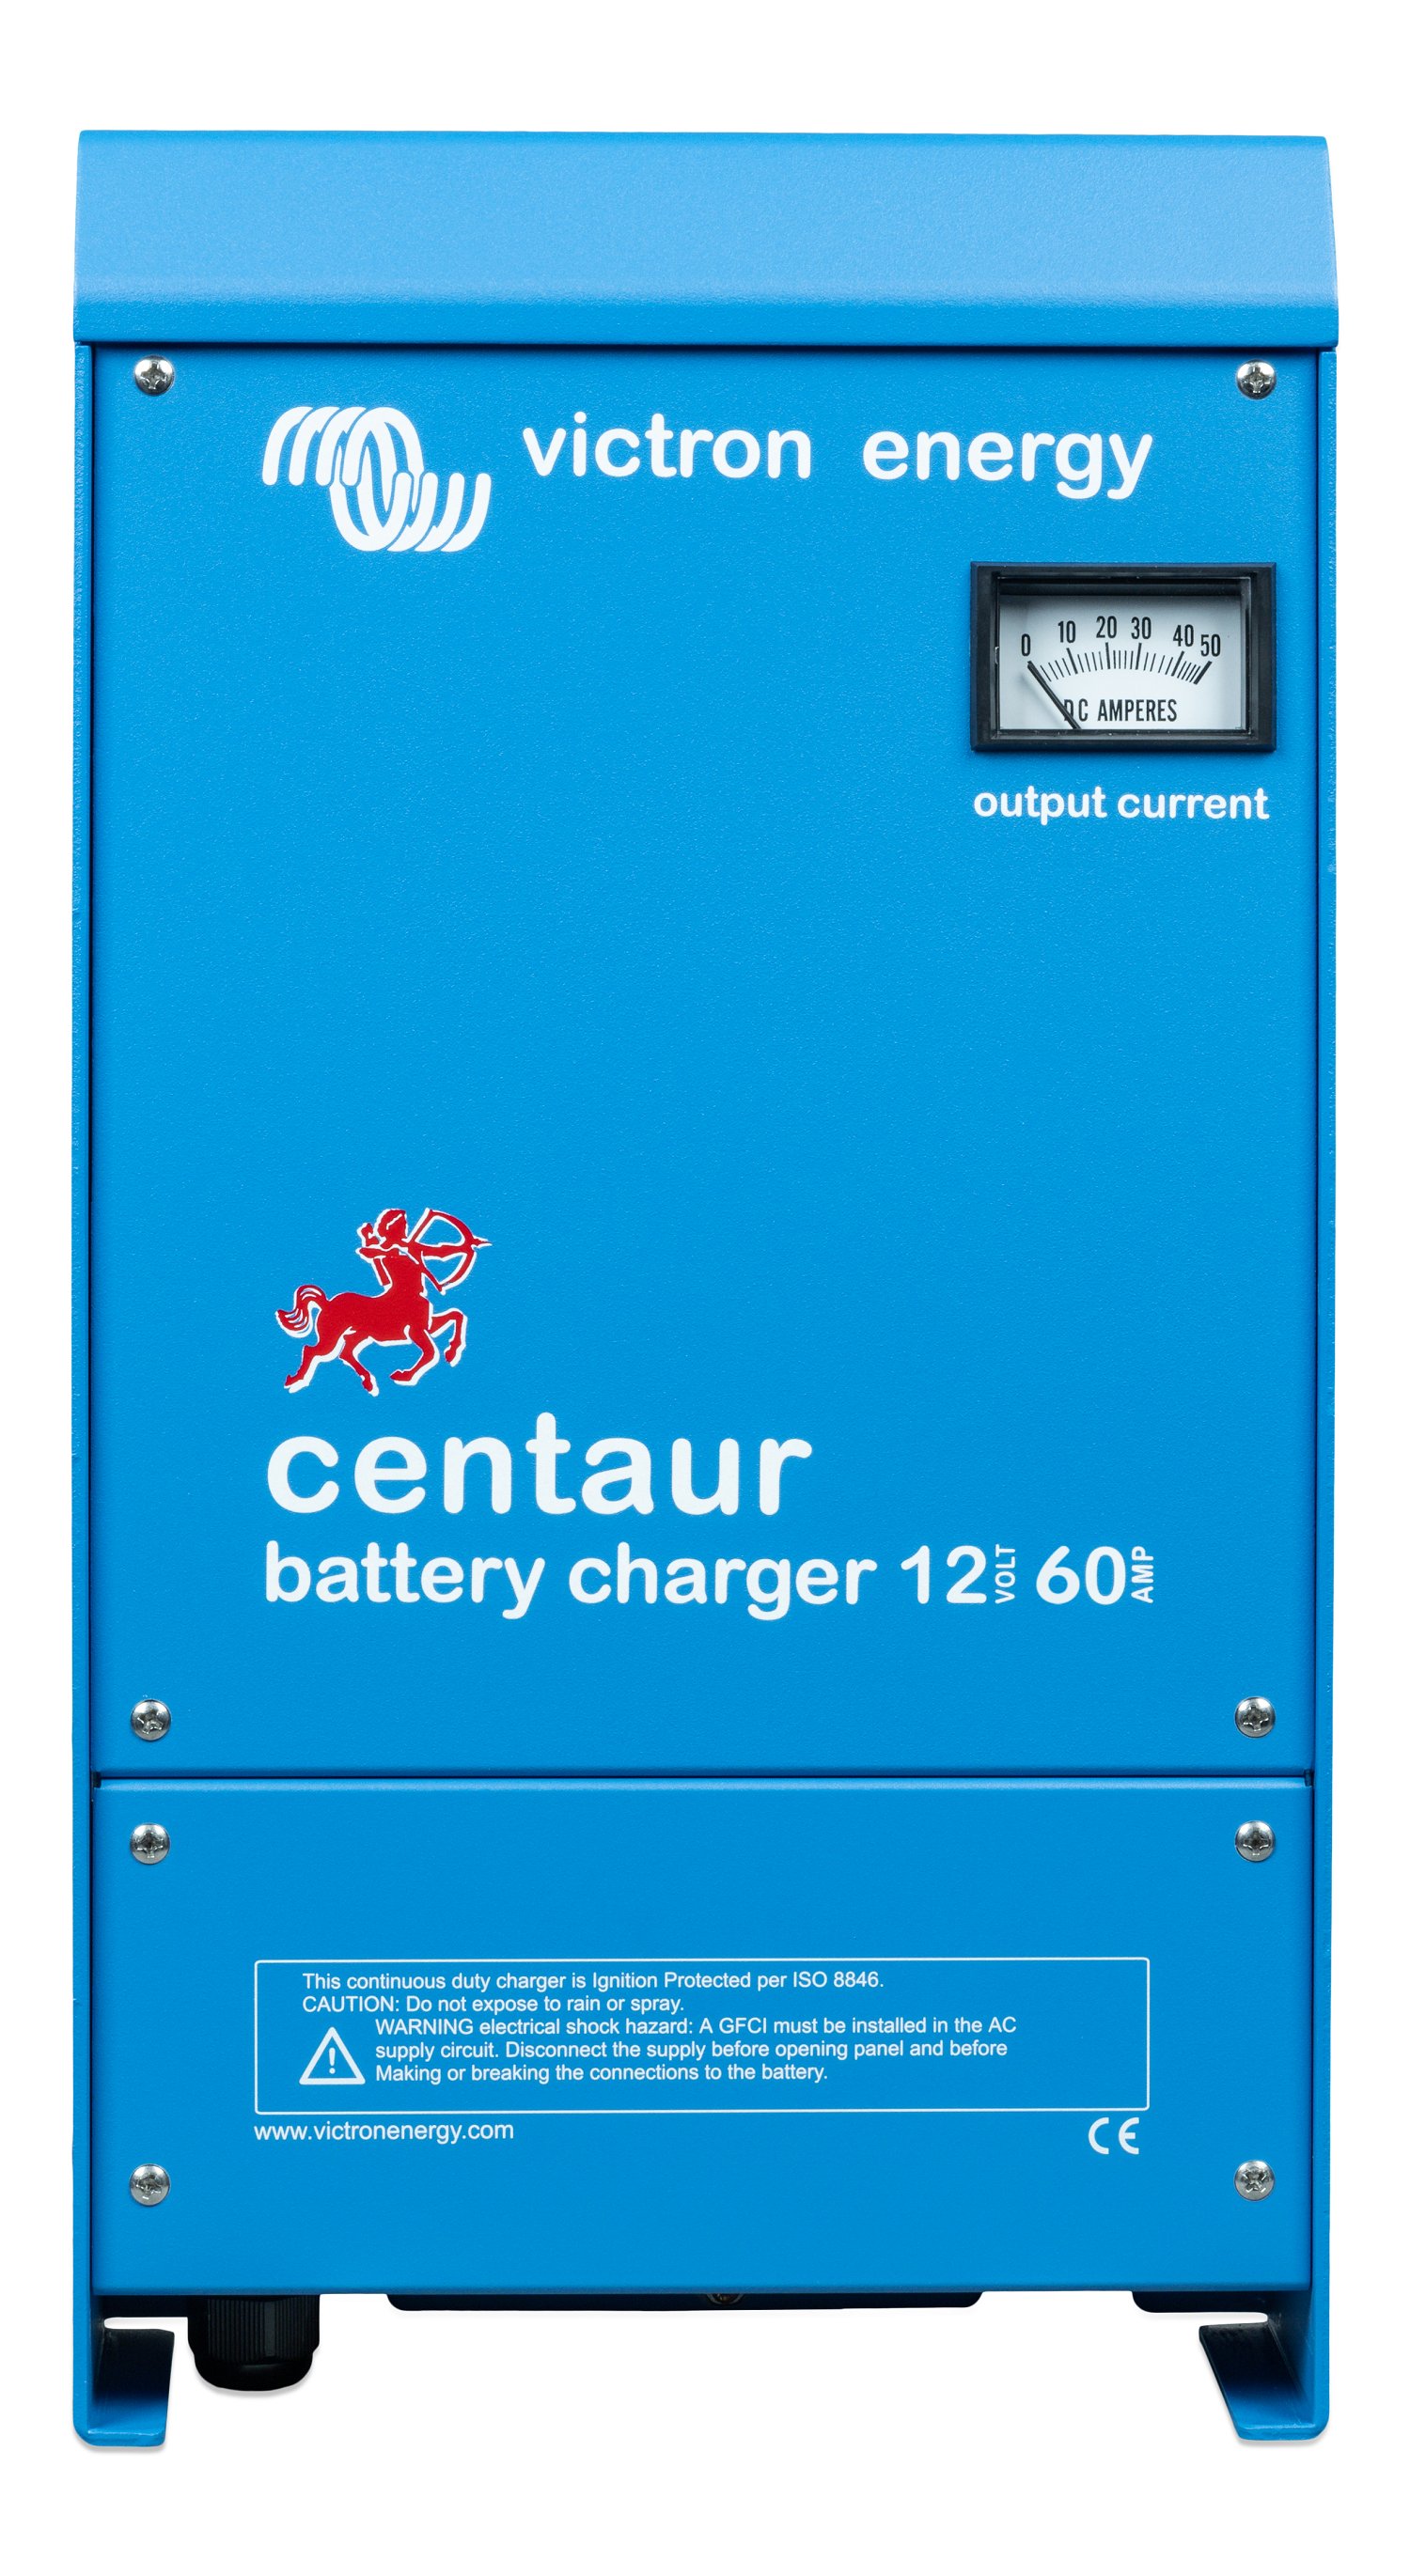 Is the Victron Centaur 12 60 compatible with Group 31 LiFeP04 batteries?